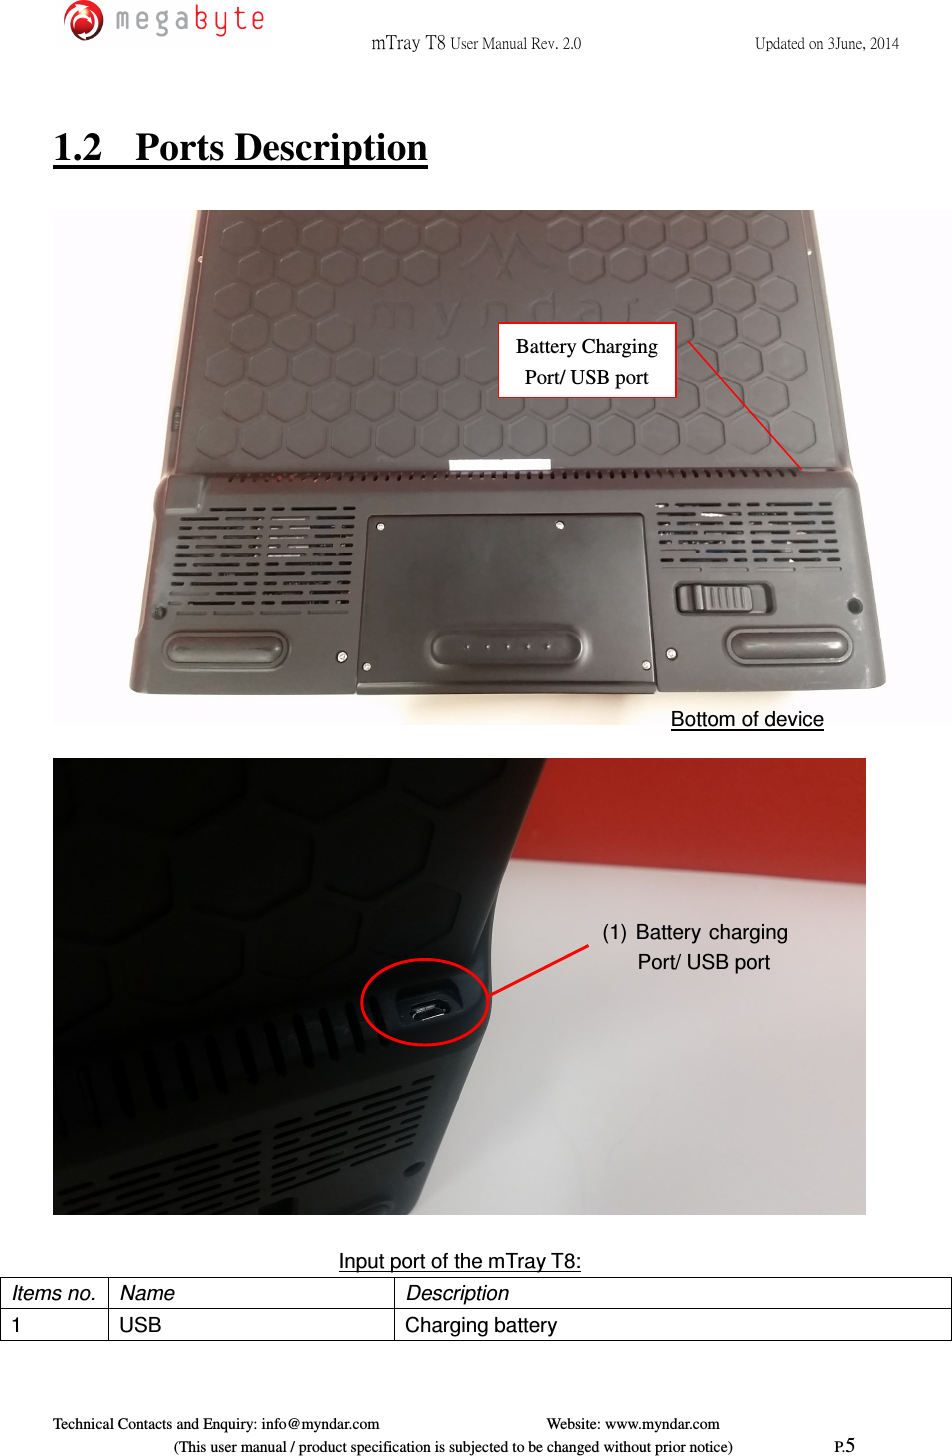  mTray T8 User Manual Rev. 2.0  Updated on 3June, 2014     Technical Contacts and Enquiry: info@myndar.com         Website: www.myndar.com                             (This user manual / product specification is subjected to be changed without prior notice)                          P.5  1.2  Ports Description        Input port of the mTray T8: Items no.  Name  Description 1  USB  Charging battery (1) Battery charging Port/ USB port Bottom of device Battery Charging Port/ USB port 